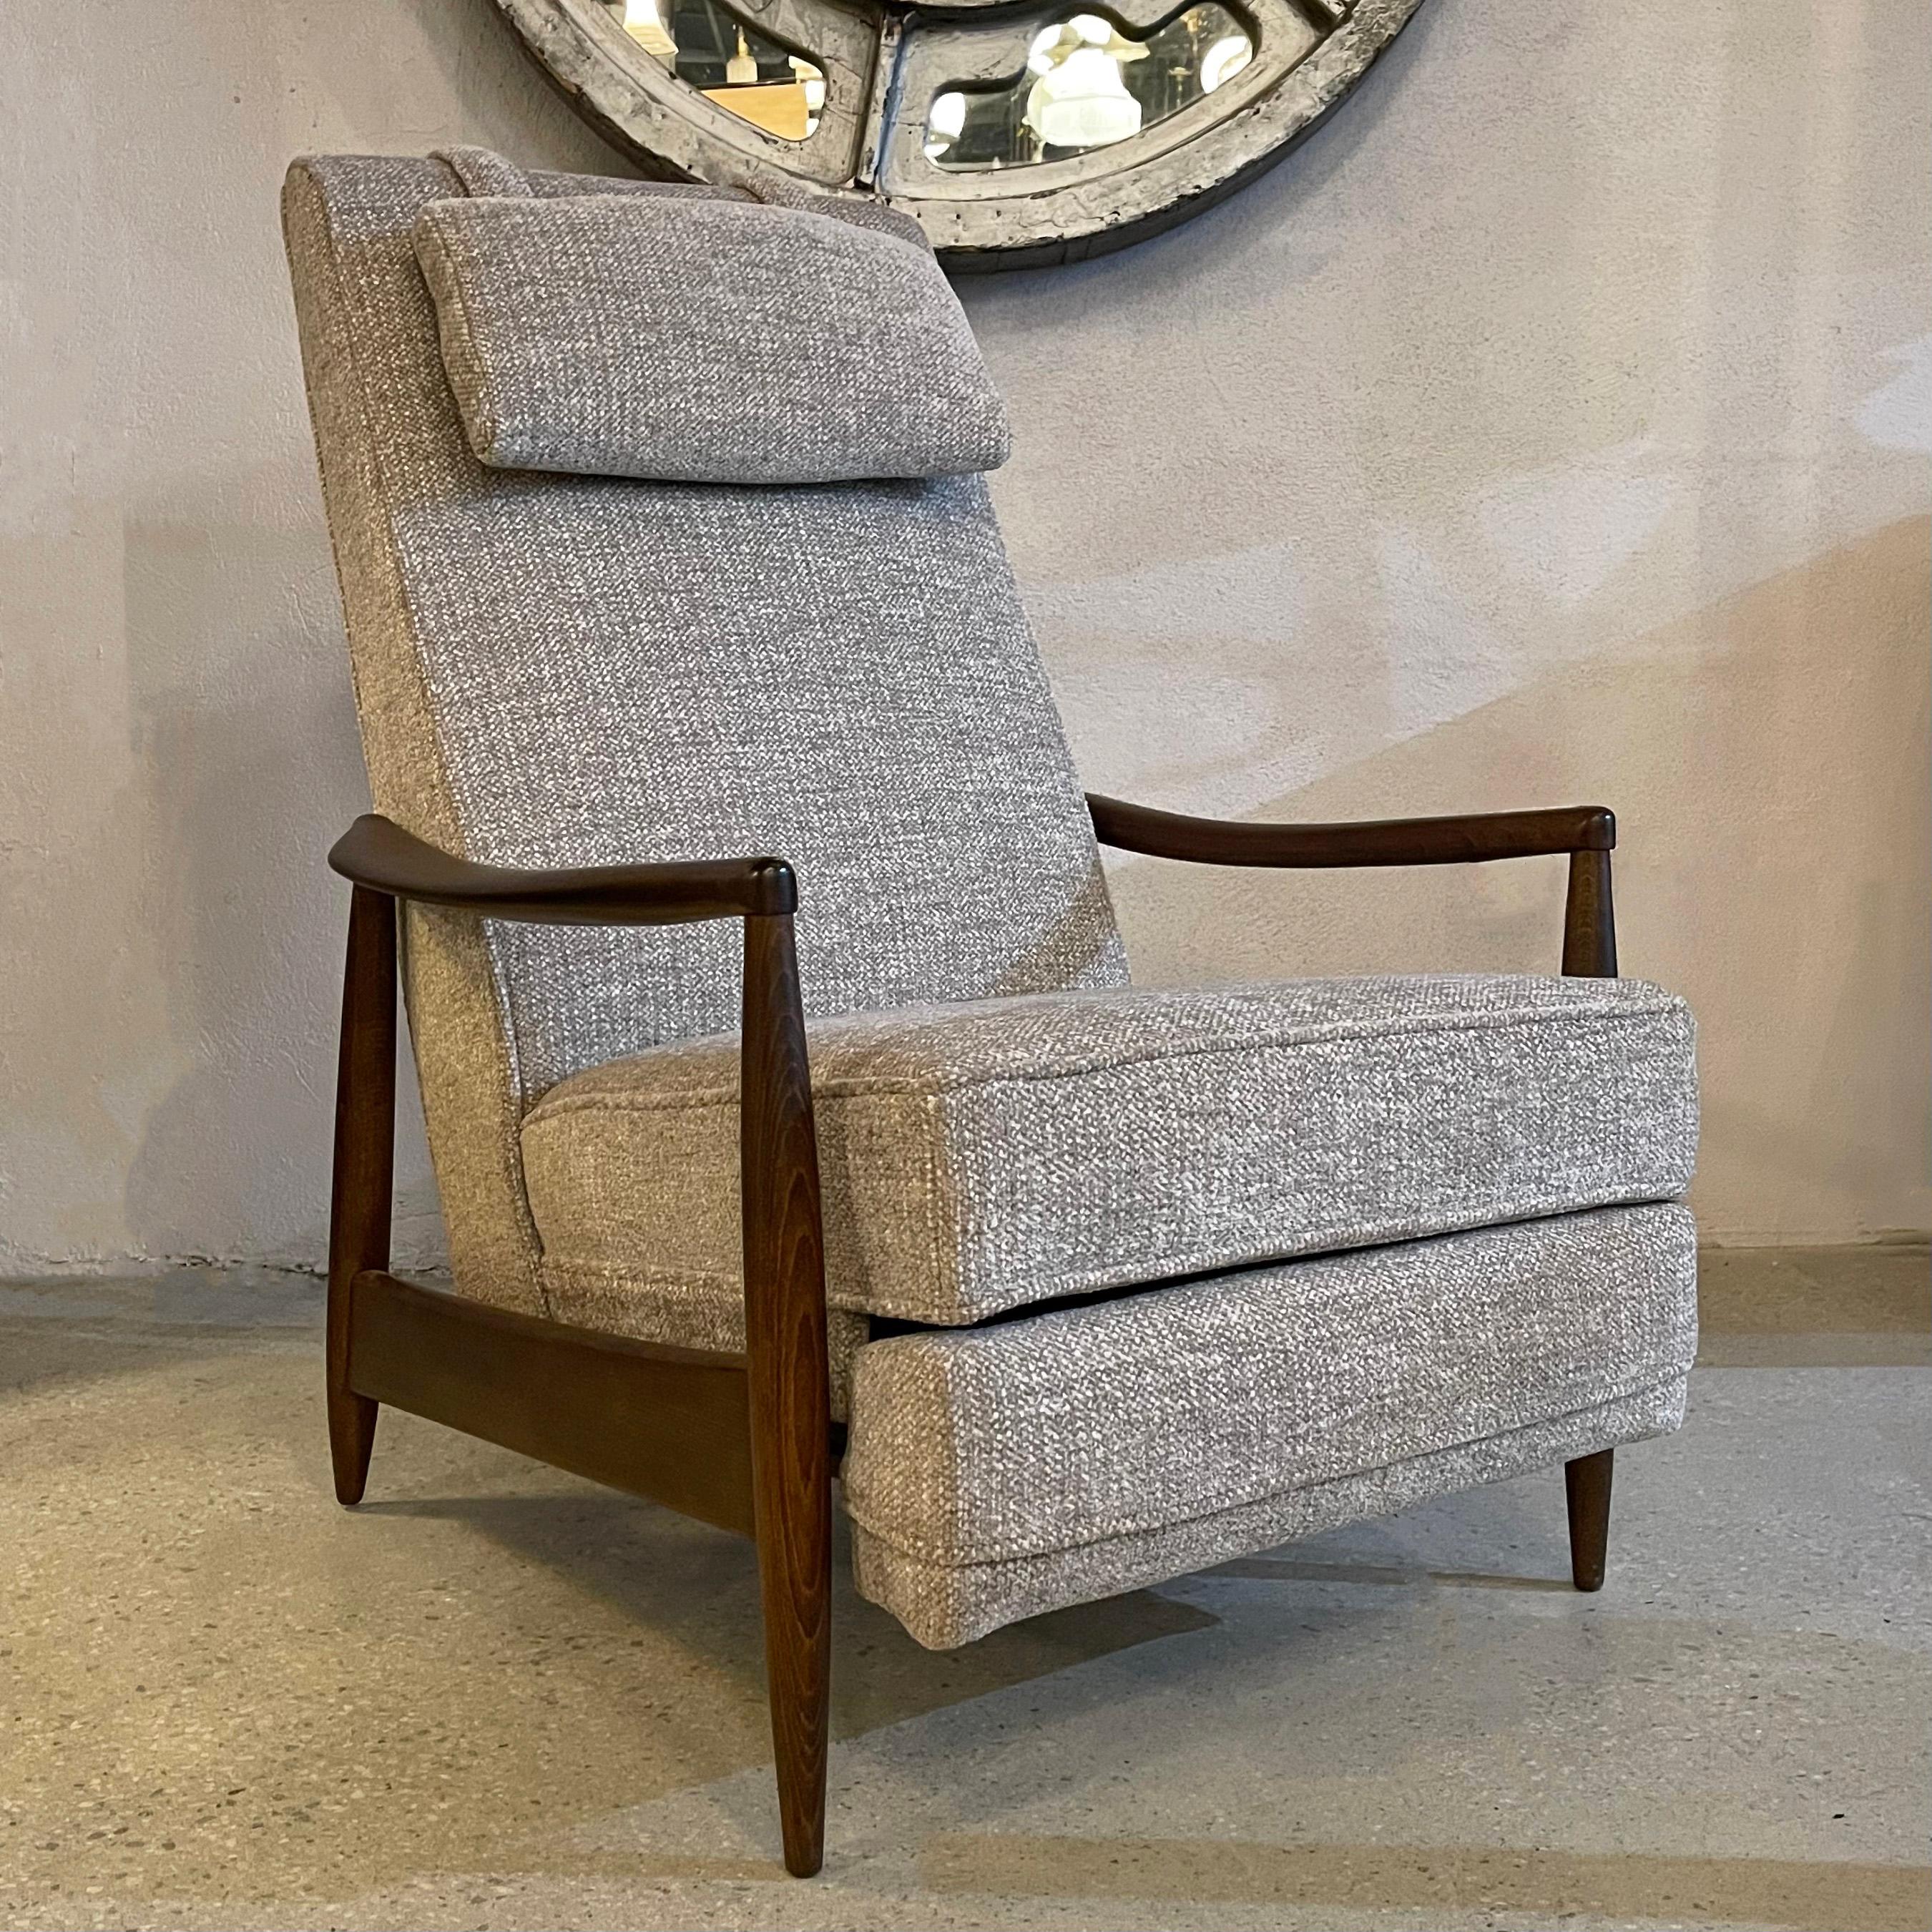 Mid-century modern, recliner lounge chair features an ebonized maple frame and soft, oatmeal chenille upholstery. The chair fully reclines to 56 inches deep to enjoy a good nap. The removeable head cushion is weighted to stay in place. The arm